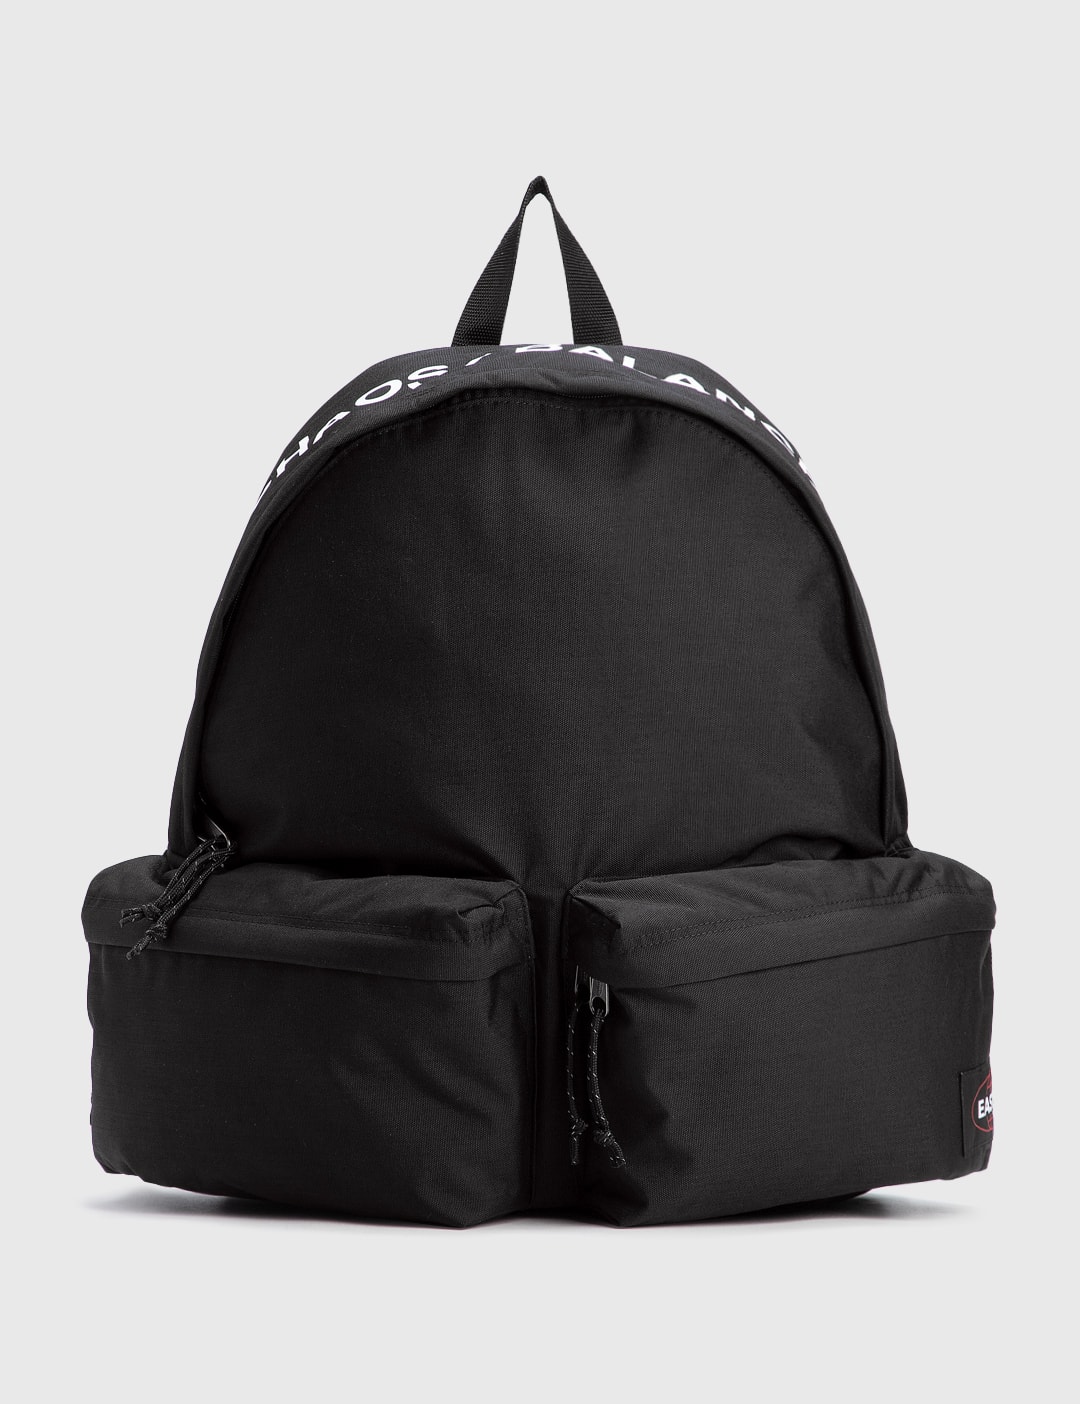 Undercover - UNDERCOVER X EASTPAK BACKPACK | - Globally Curated Fashion Lifestyle by Hypebeast